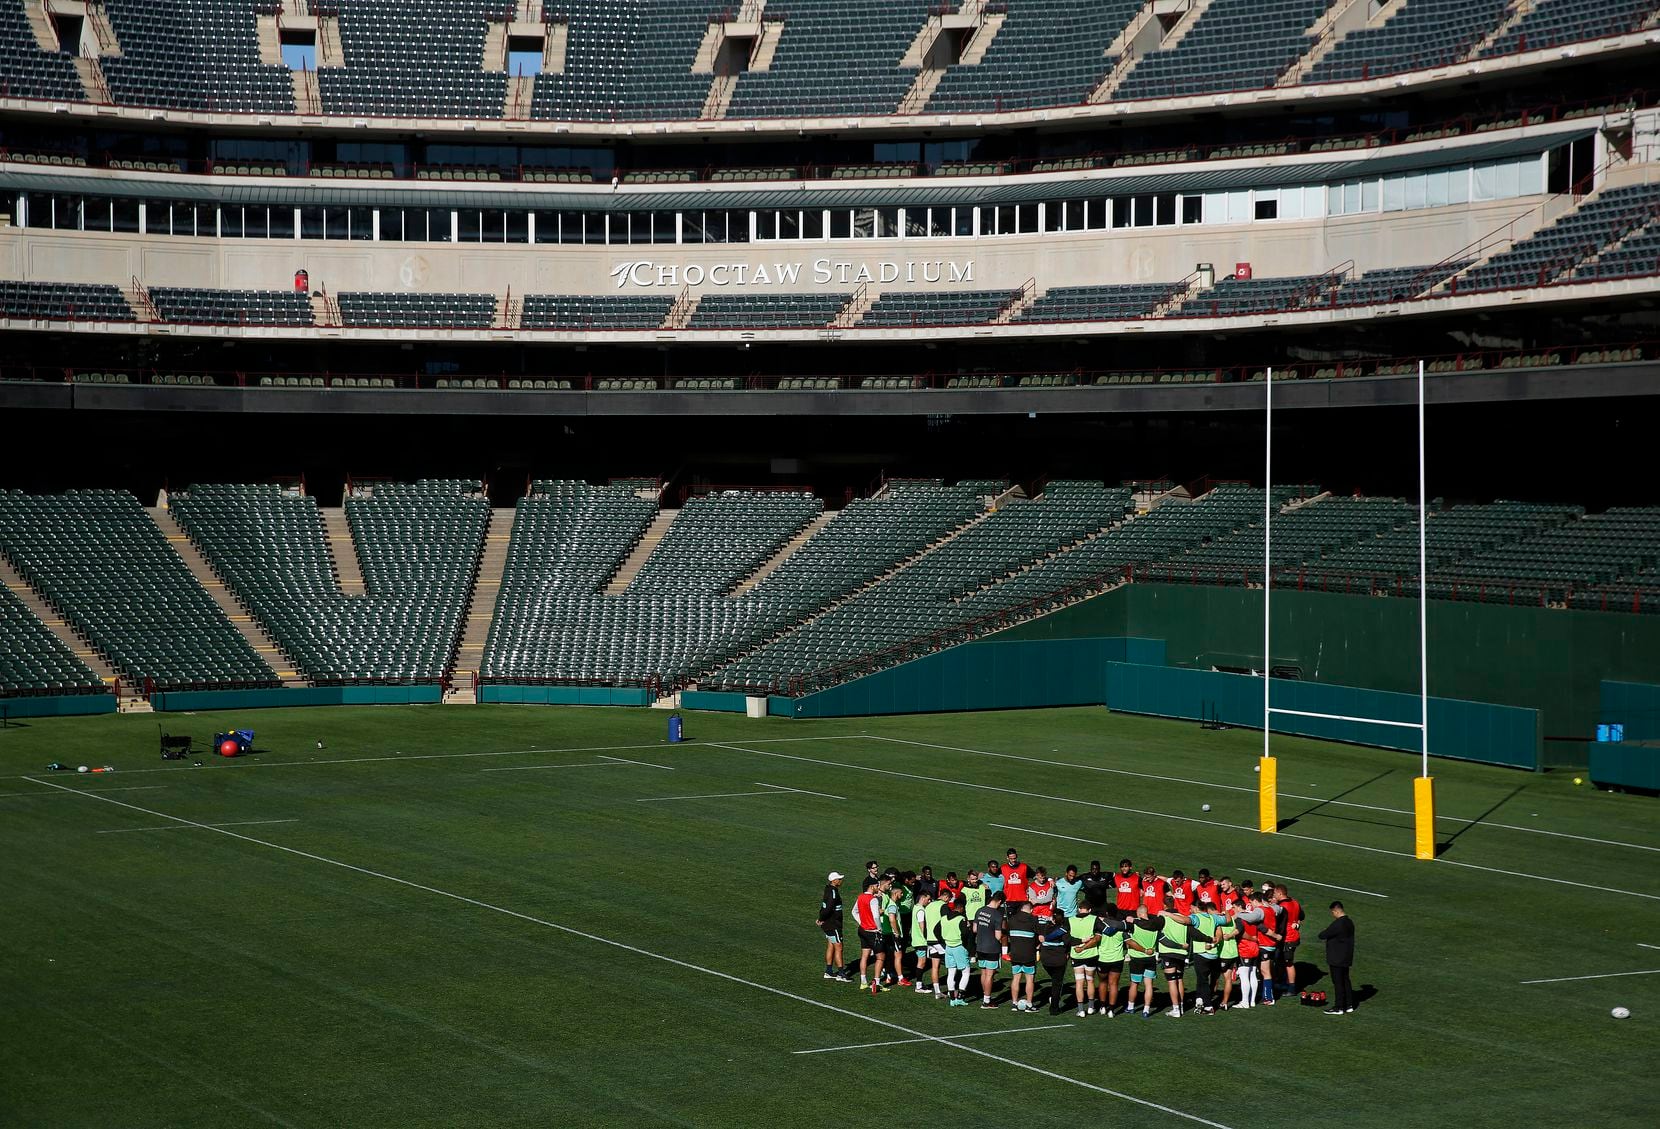 Members of the Dallas Jackals rugby team join arms during a break where they practice and...